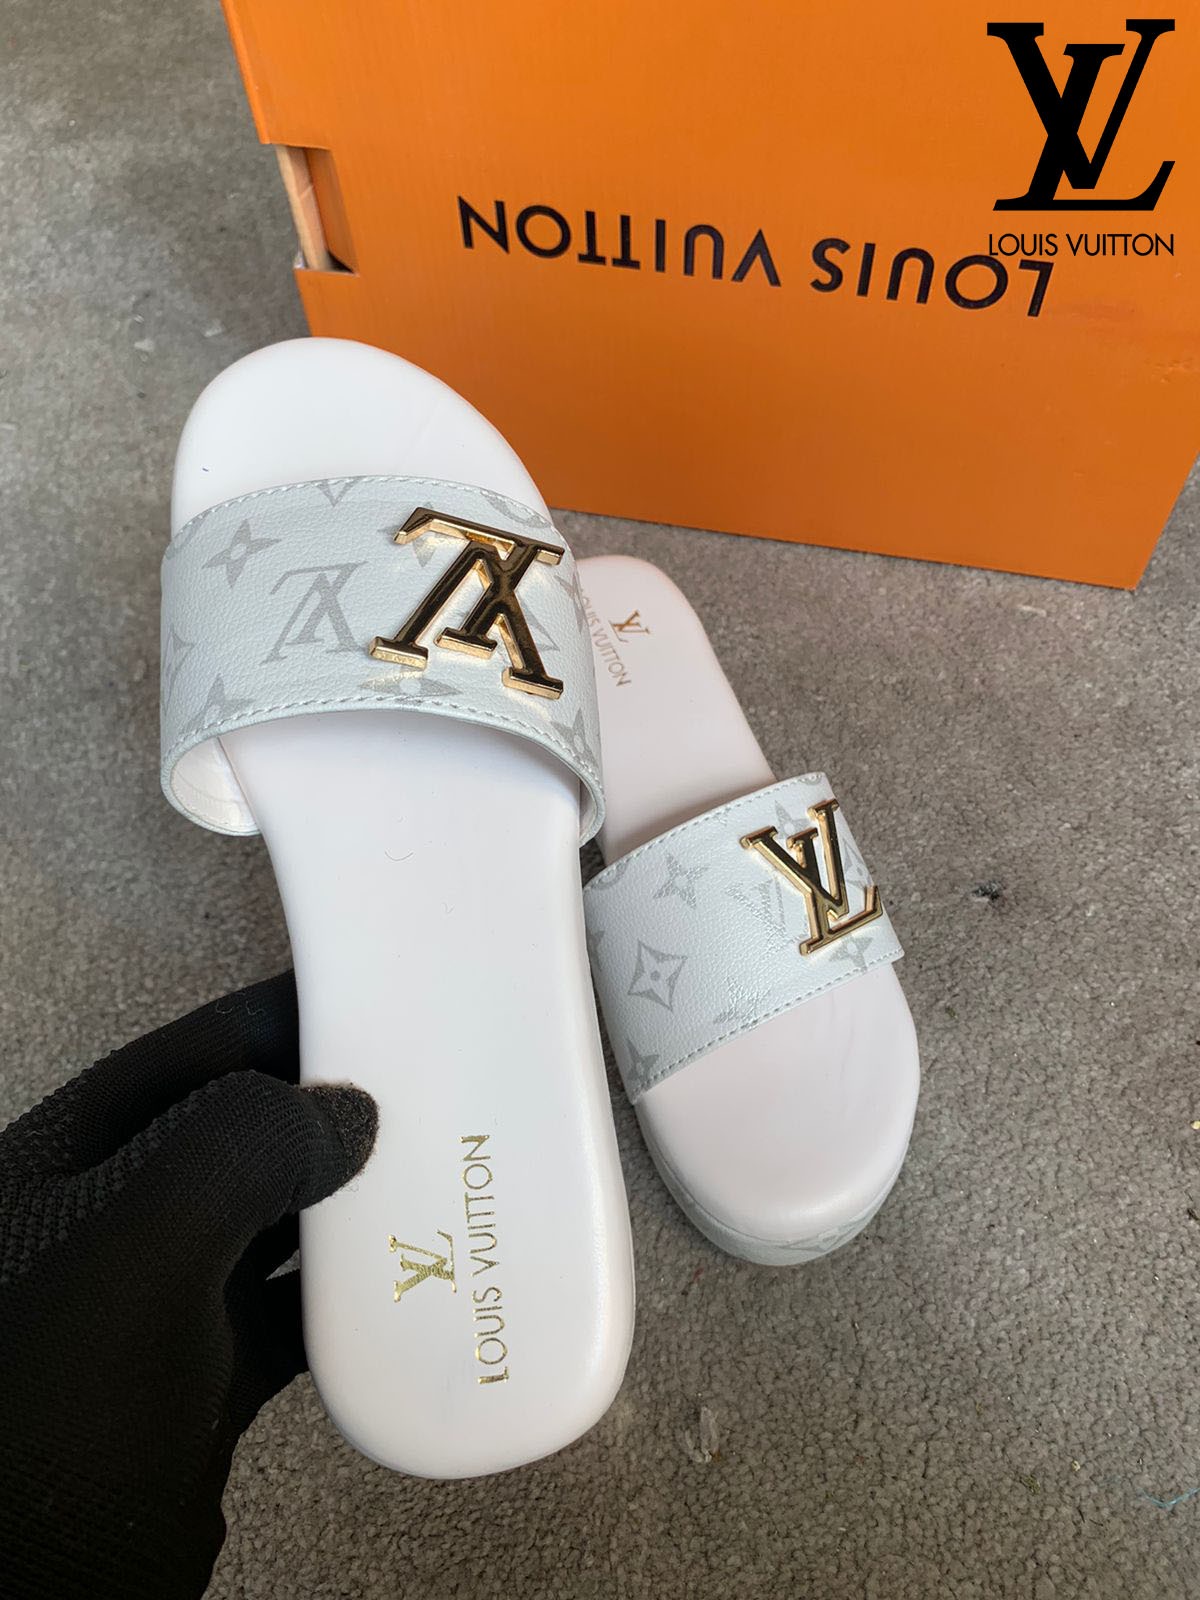 FIRST COPY HIGH QUALITY SANDLES FOR WOMEN BY LOUIS VUITTON